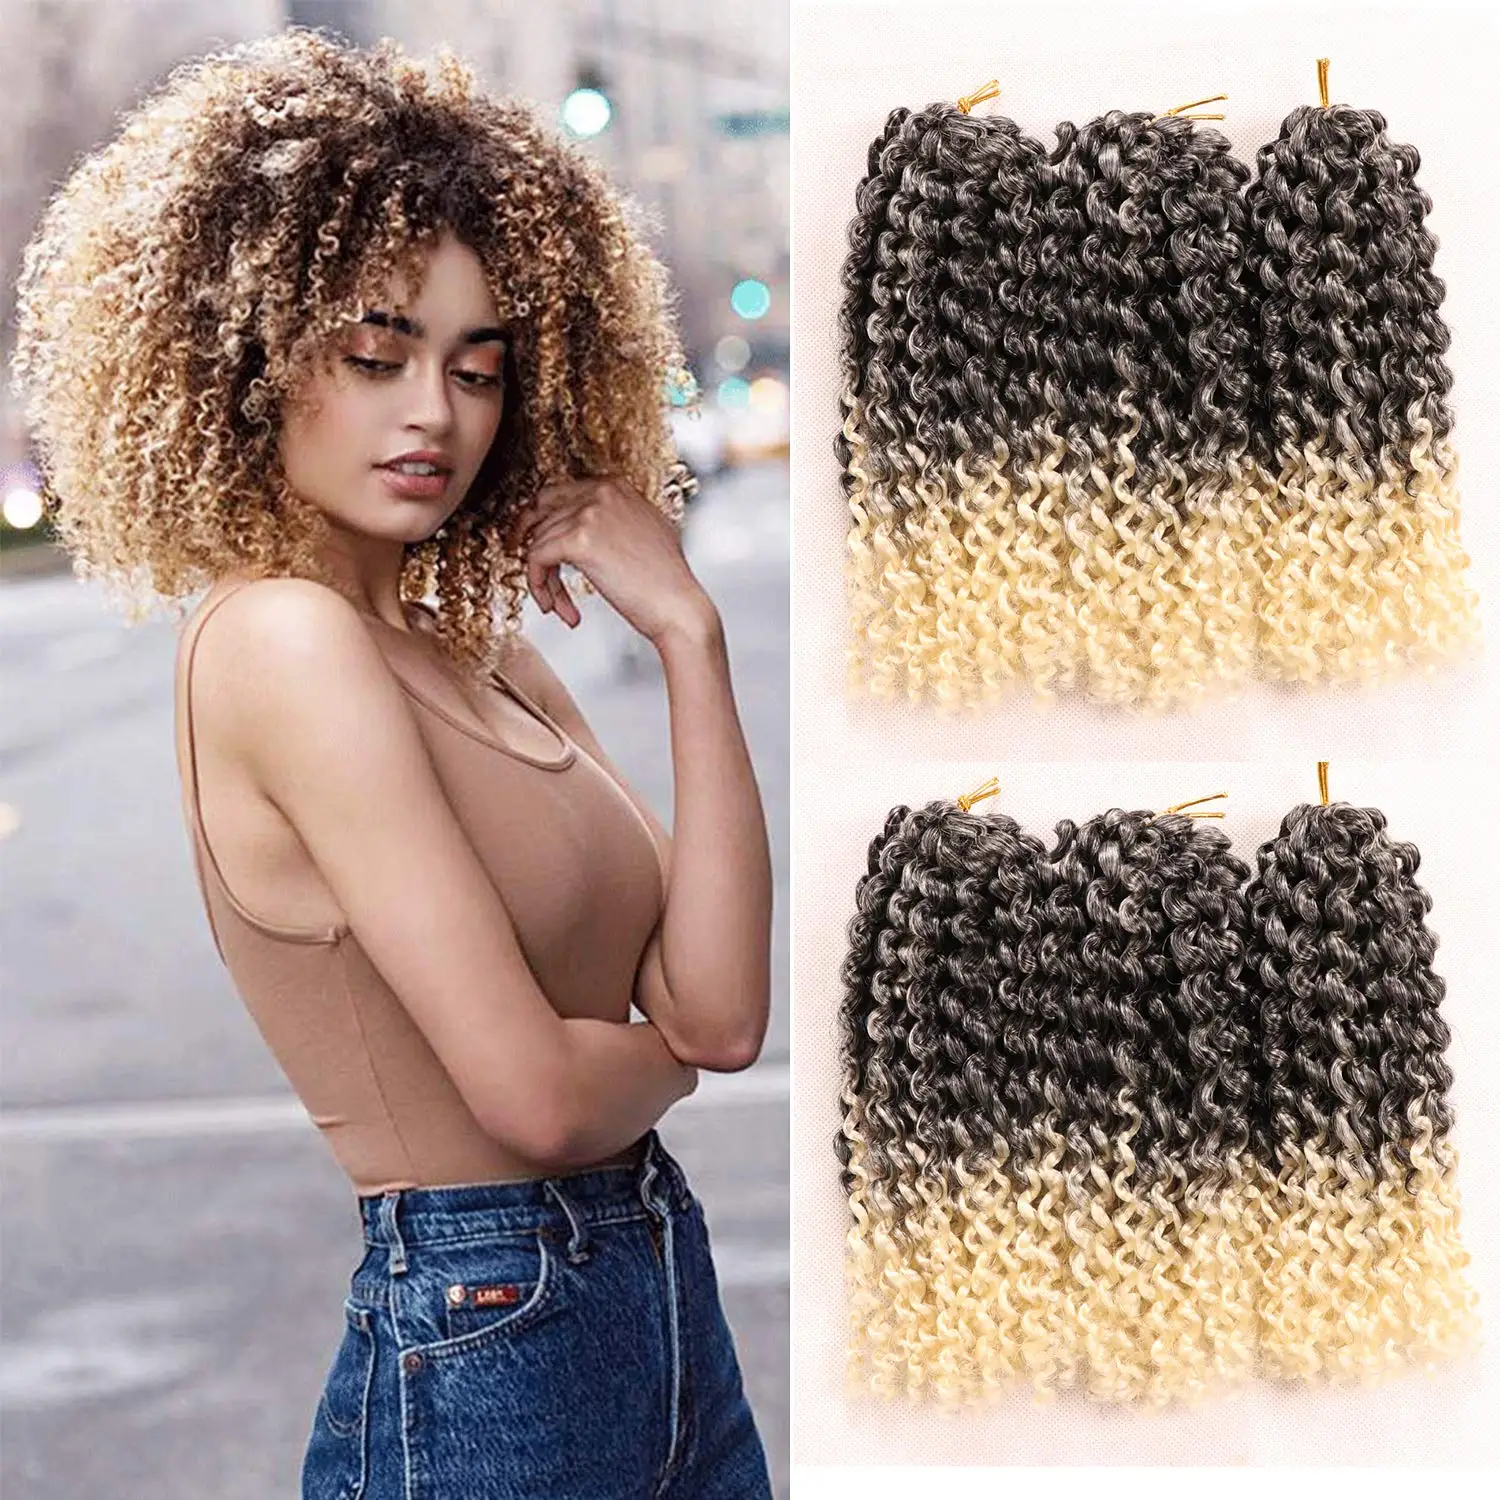 

8 Inch Short Marlybob Crochet Hair 3 Bundles Passion Twist Afro Kinky Curly Braids Hair Synthetic Braiding Hair Extension NS05